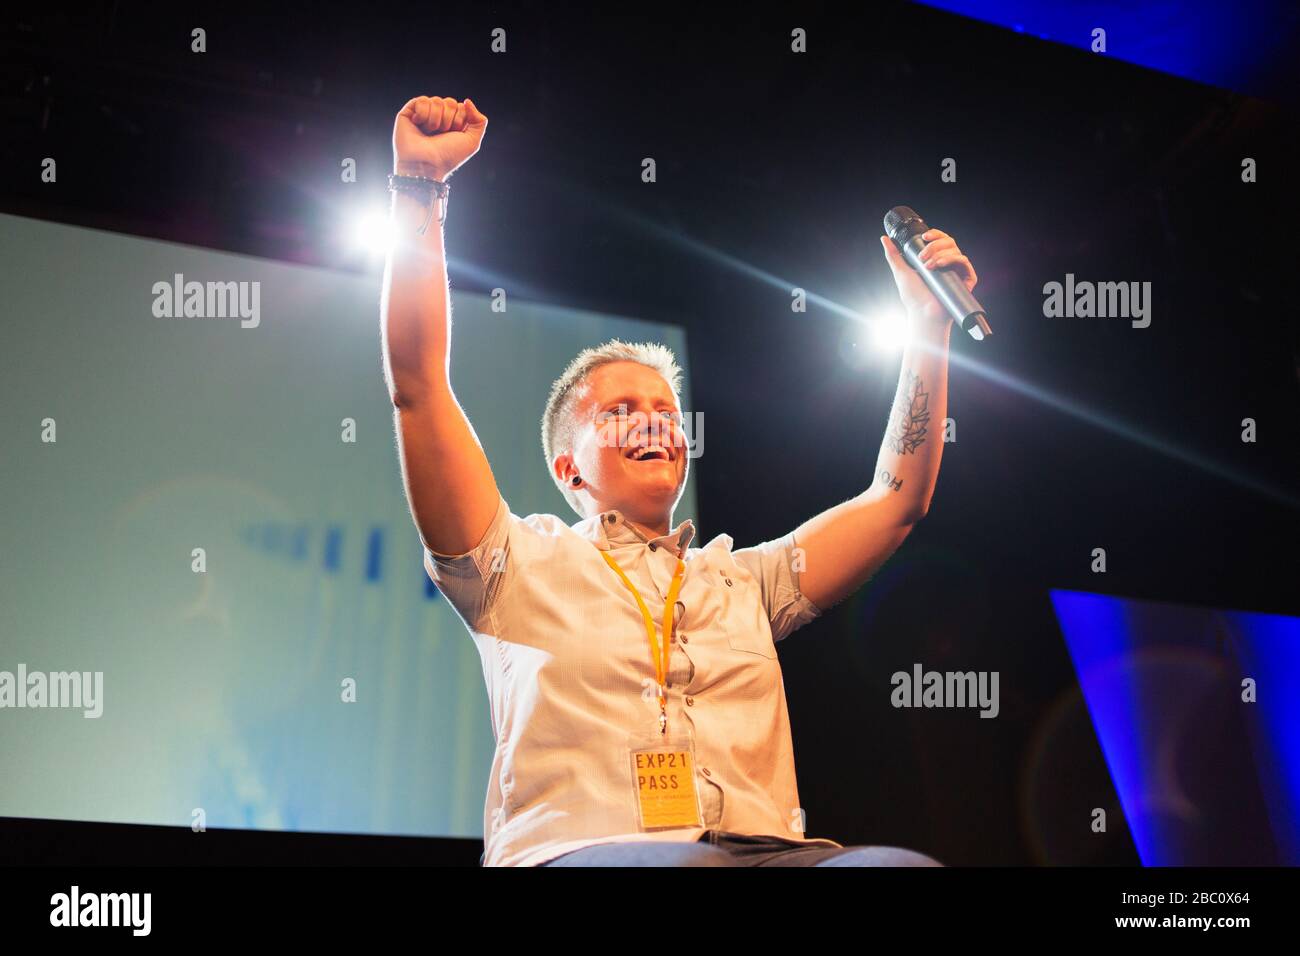 Enthusiastic, smiling female speaker with microphone cheering on stage Stock Photo